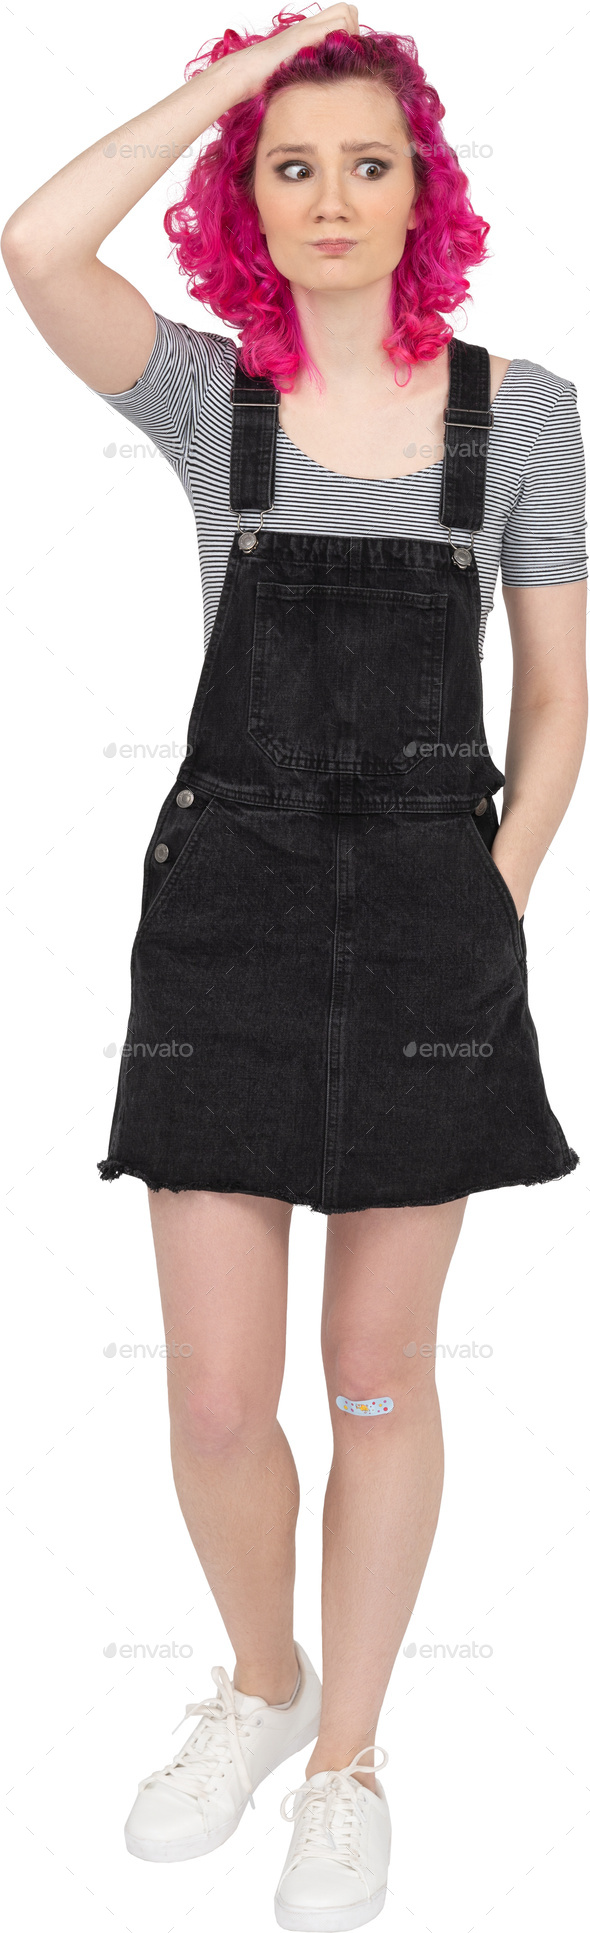 a woman with pink hair is wearing a black denim skirt